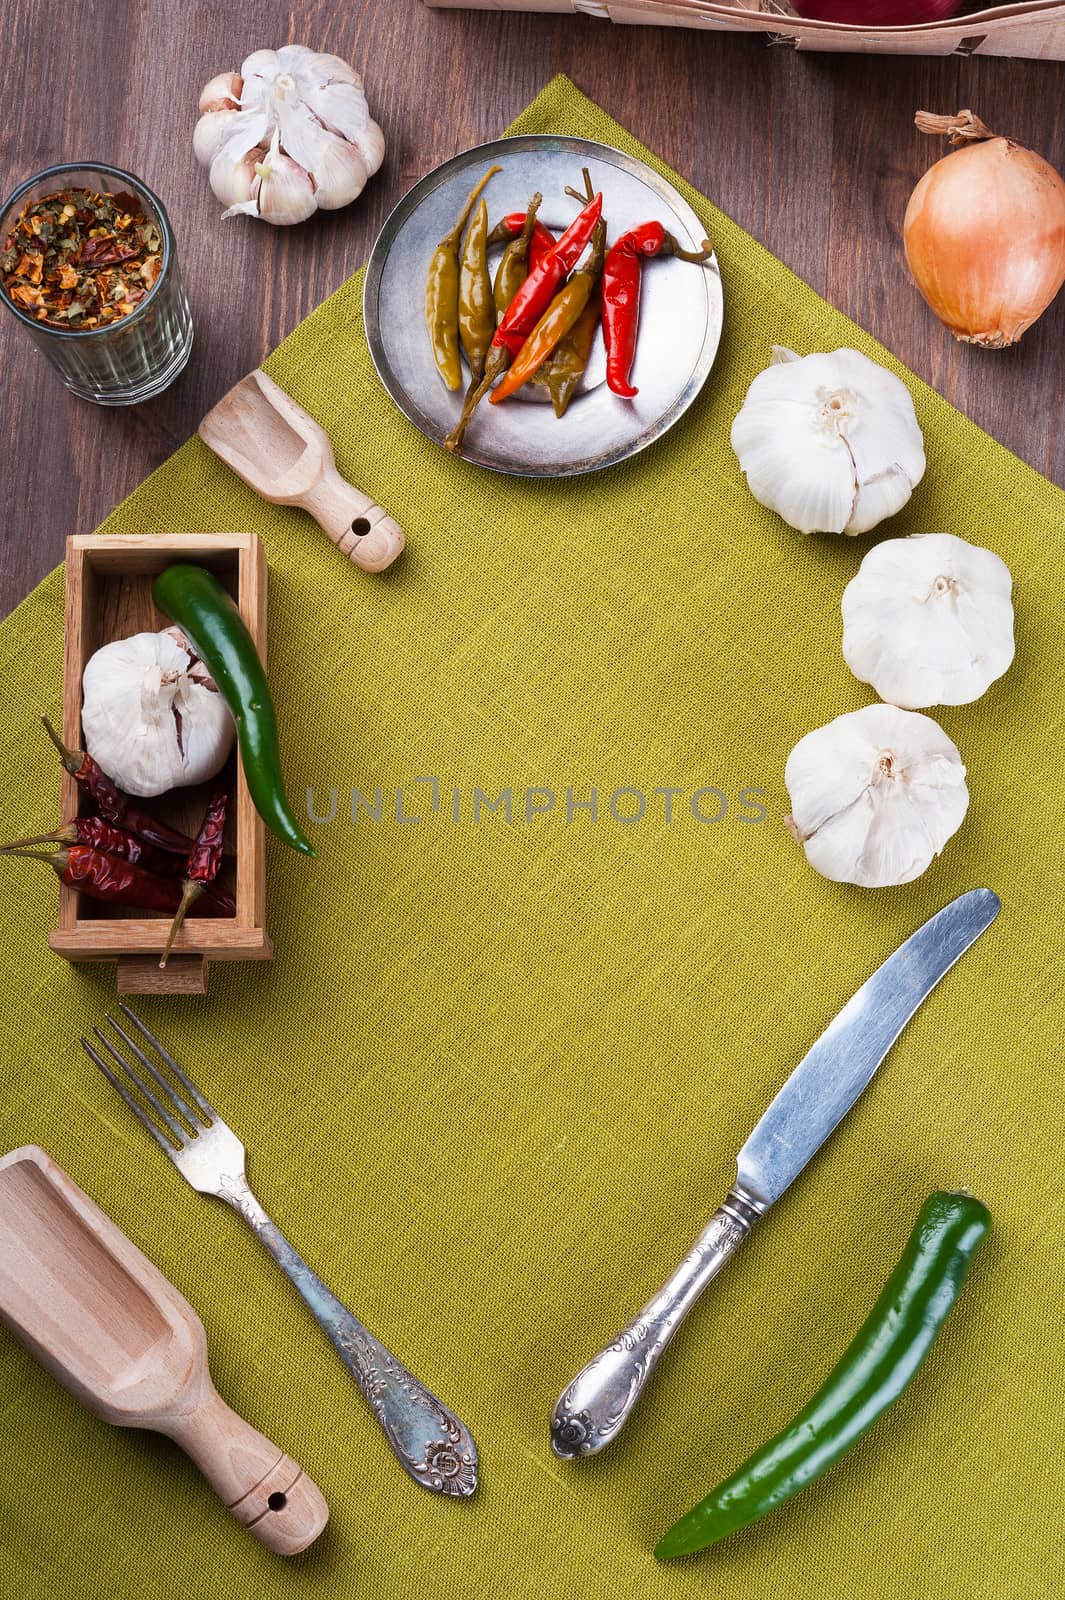 Several kinds of pepper and garlic, on green linen napkin